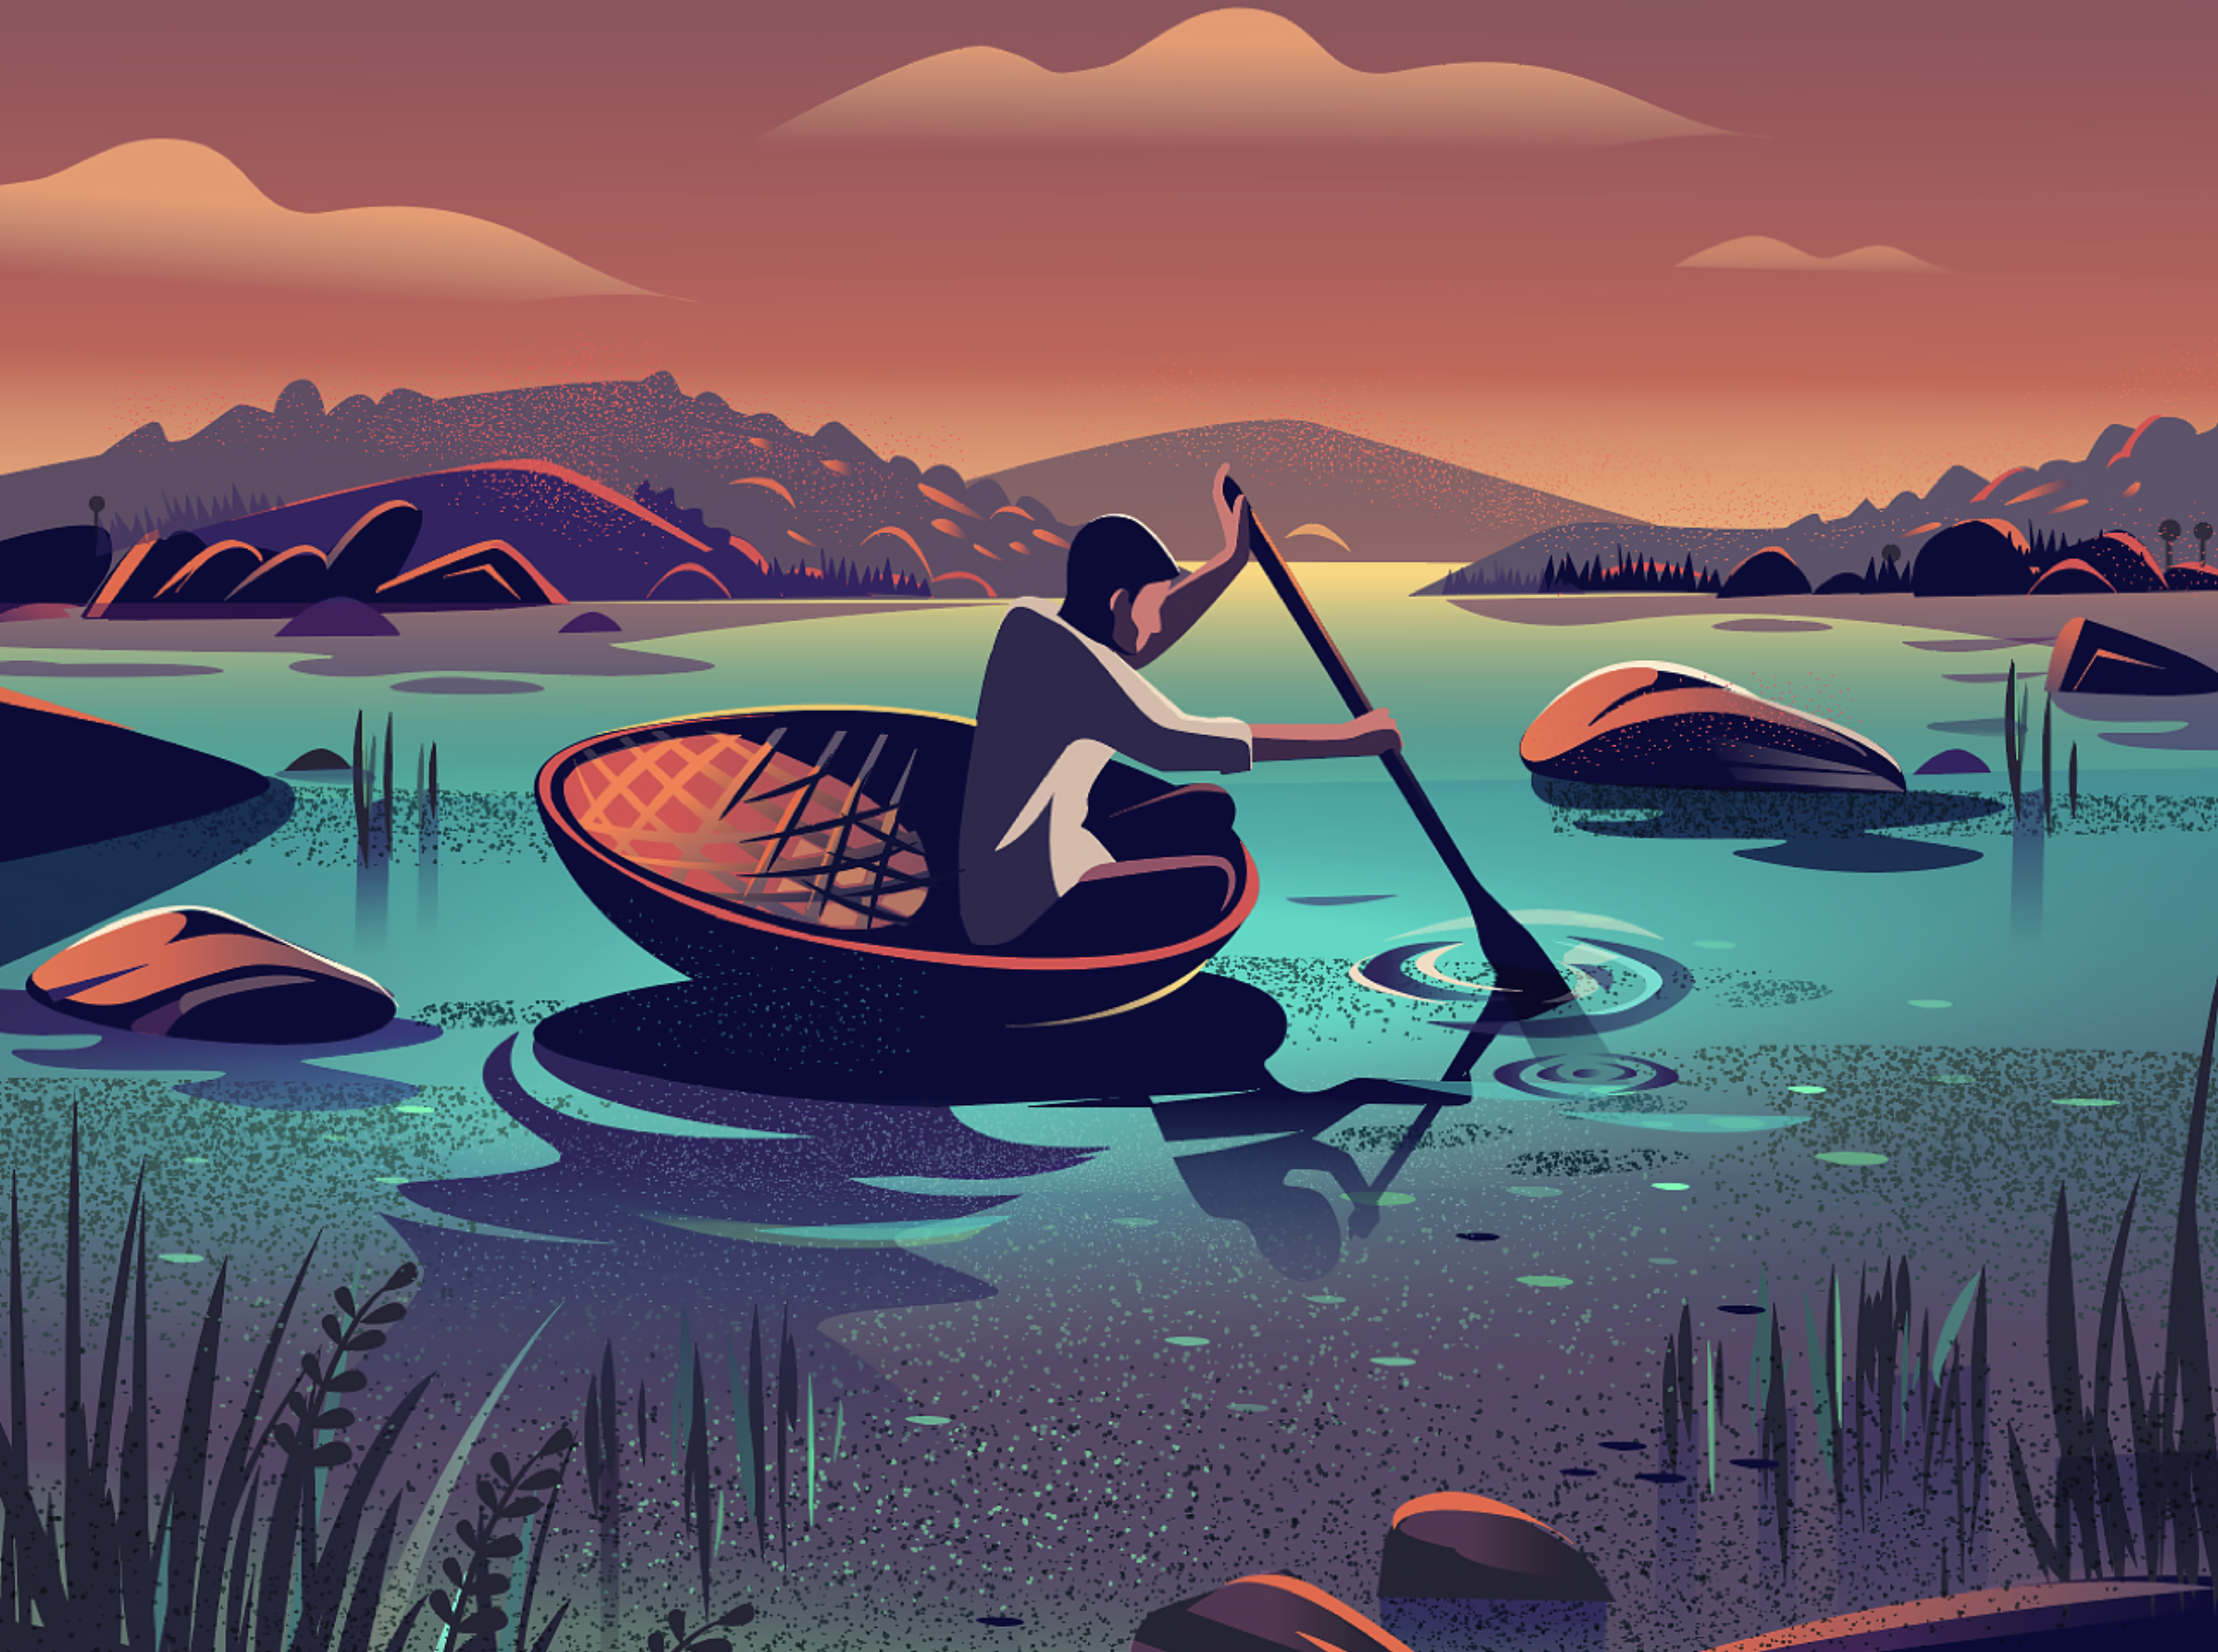 A man on a small boat paddling towards the river, with rocks and mountain as a background.,